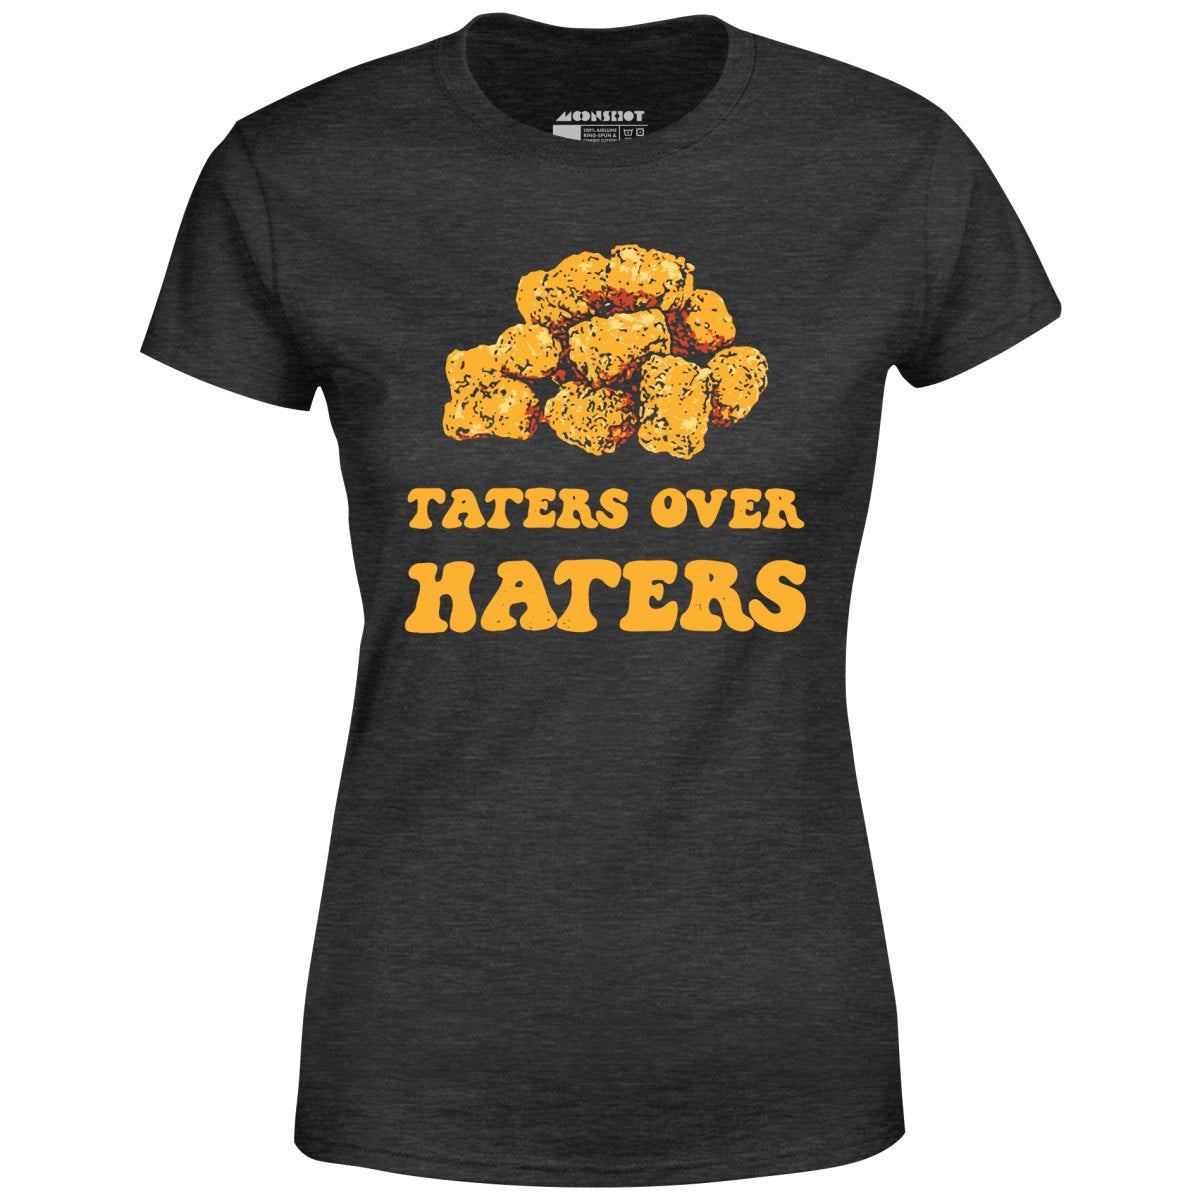 Taters Over Haters - Women's T-Shirt